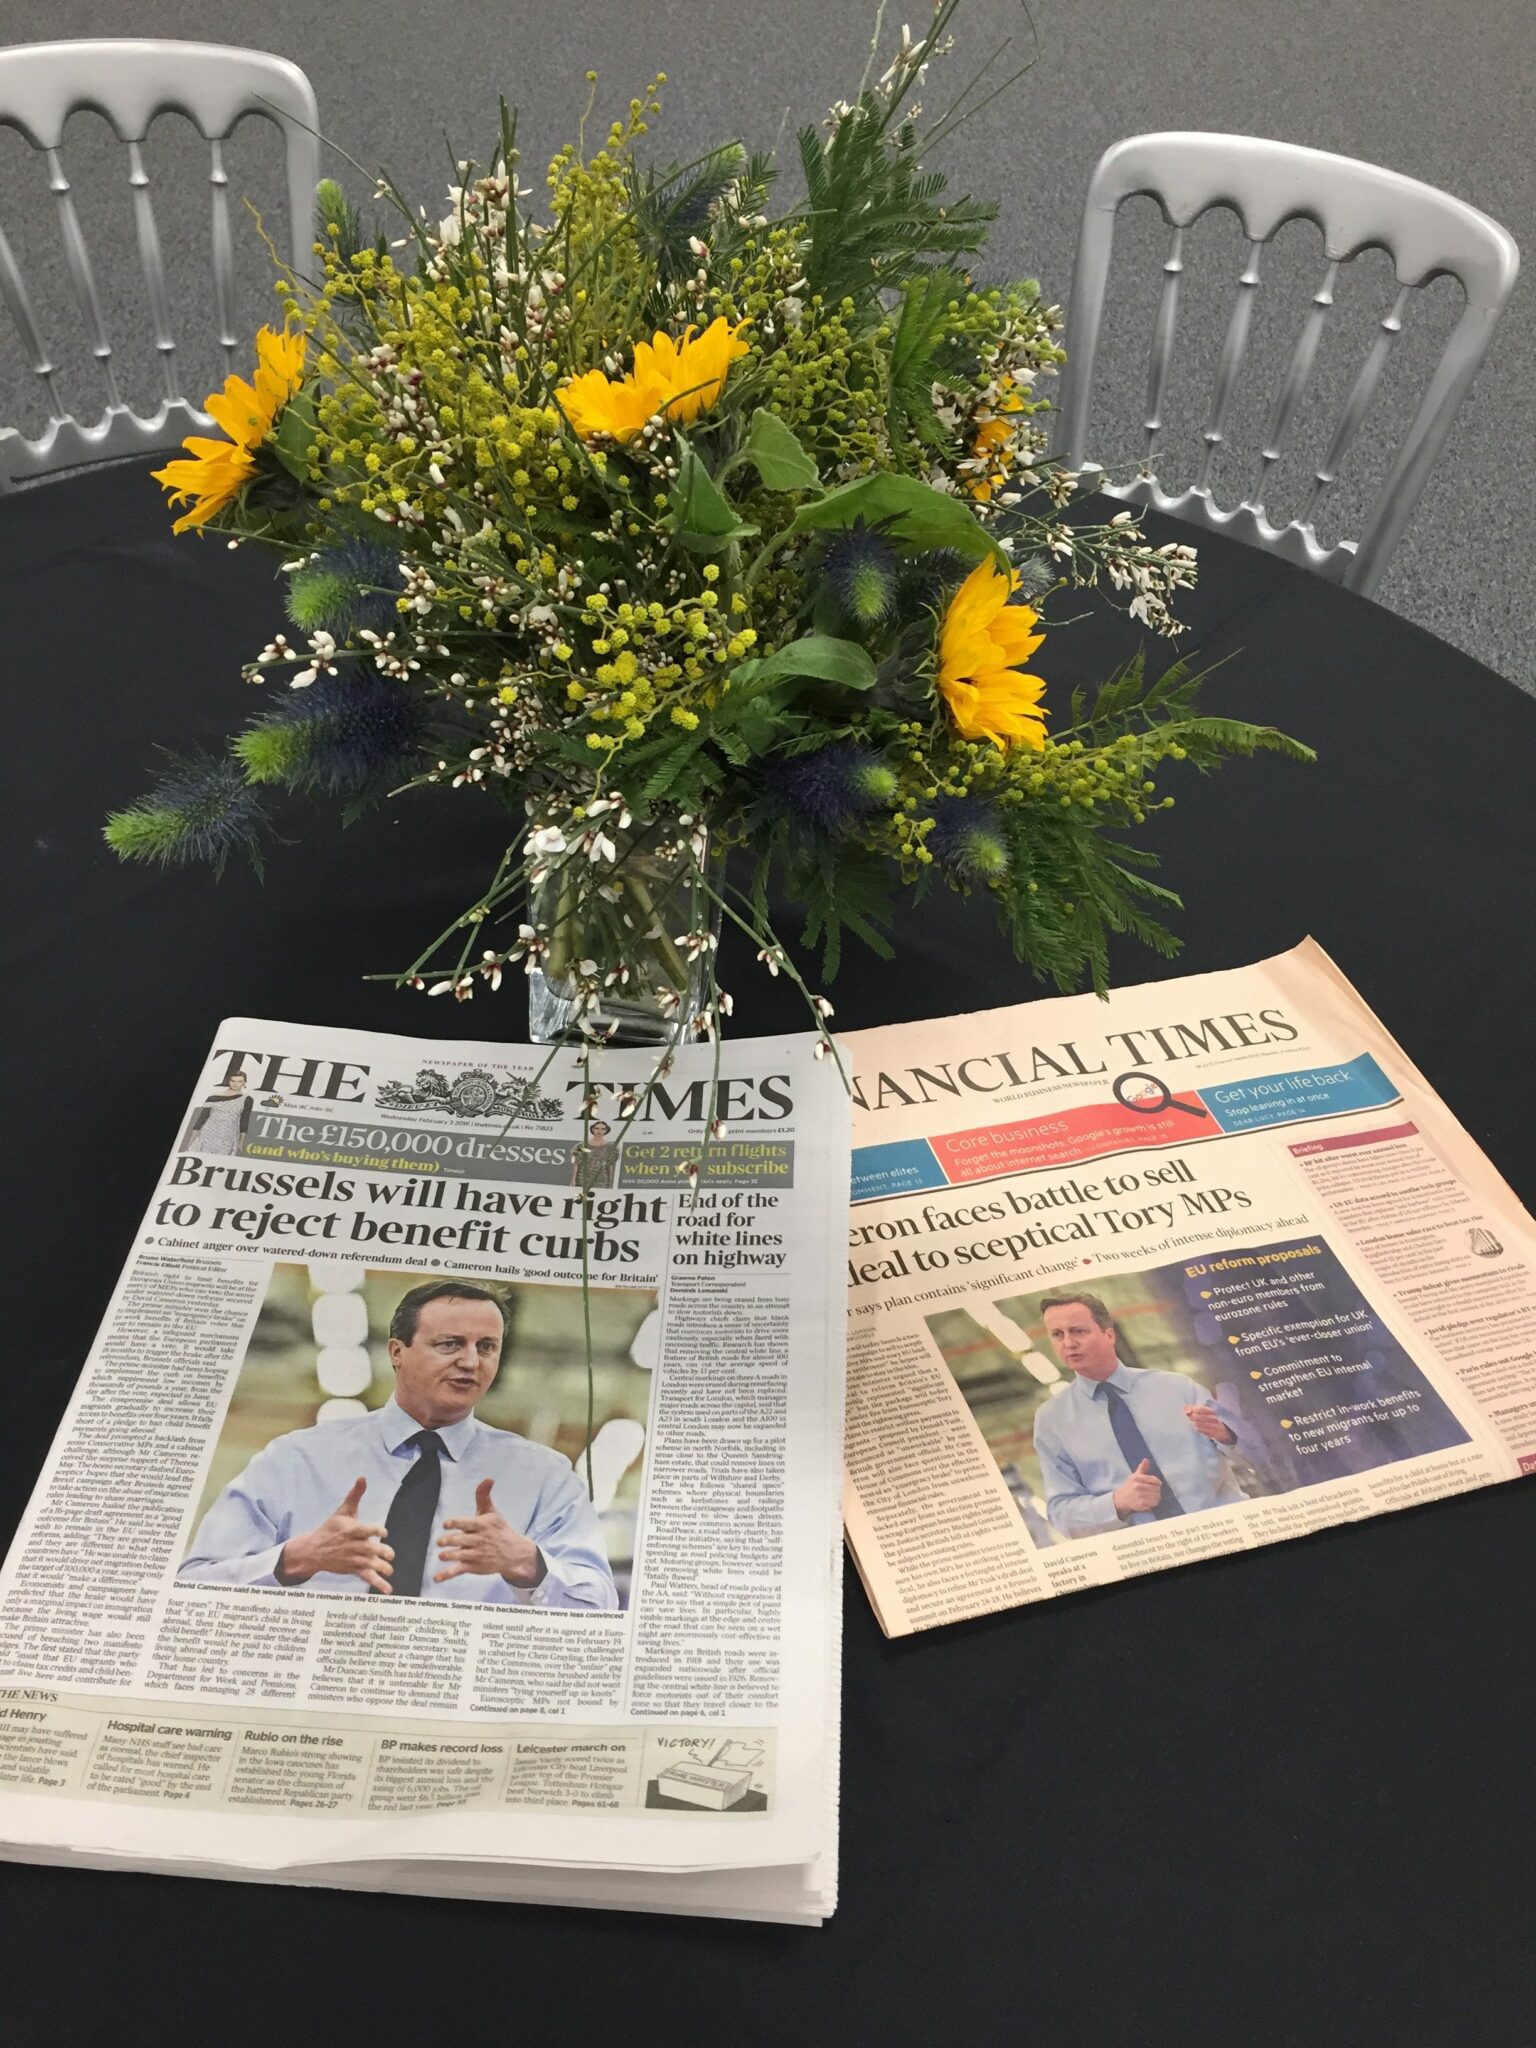 Breakfast Launch | Newspapers on Table